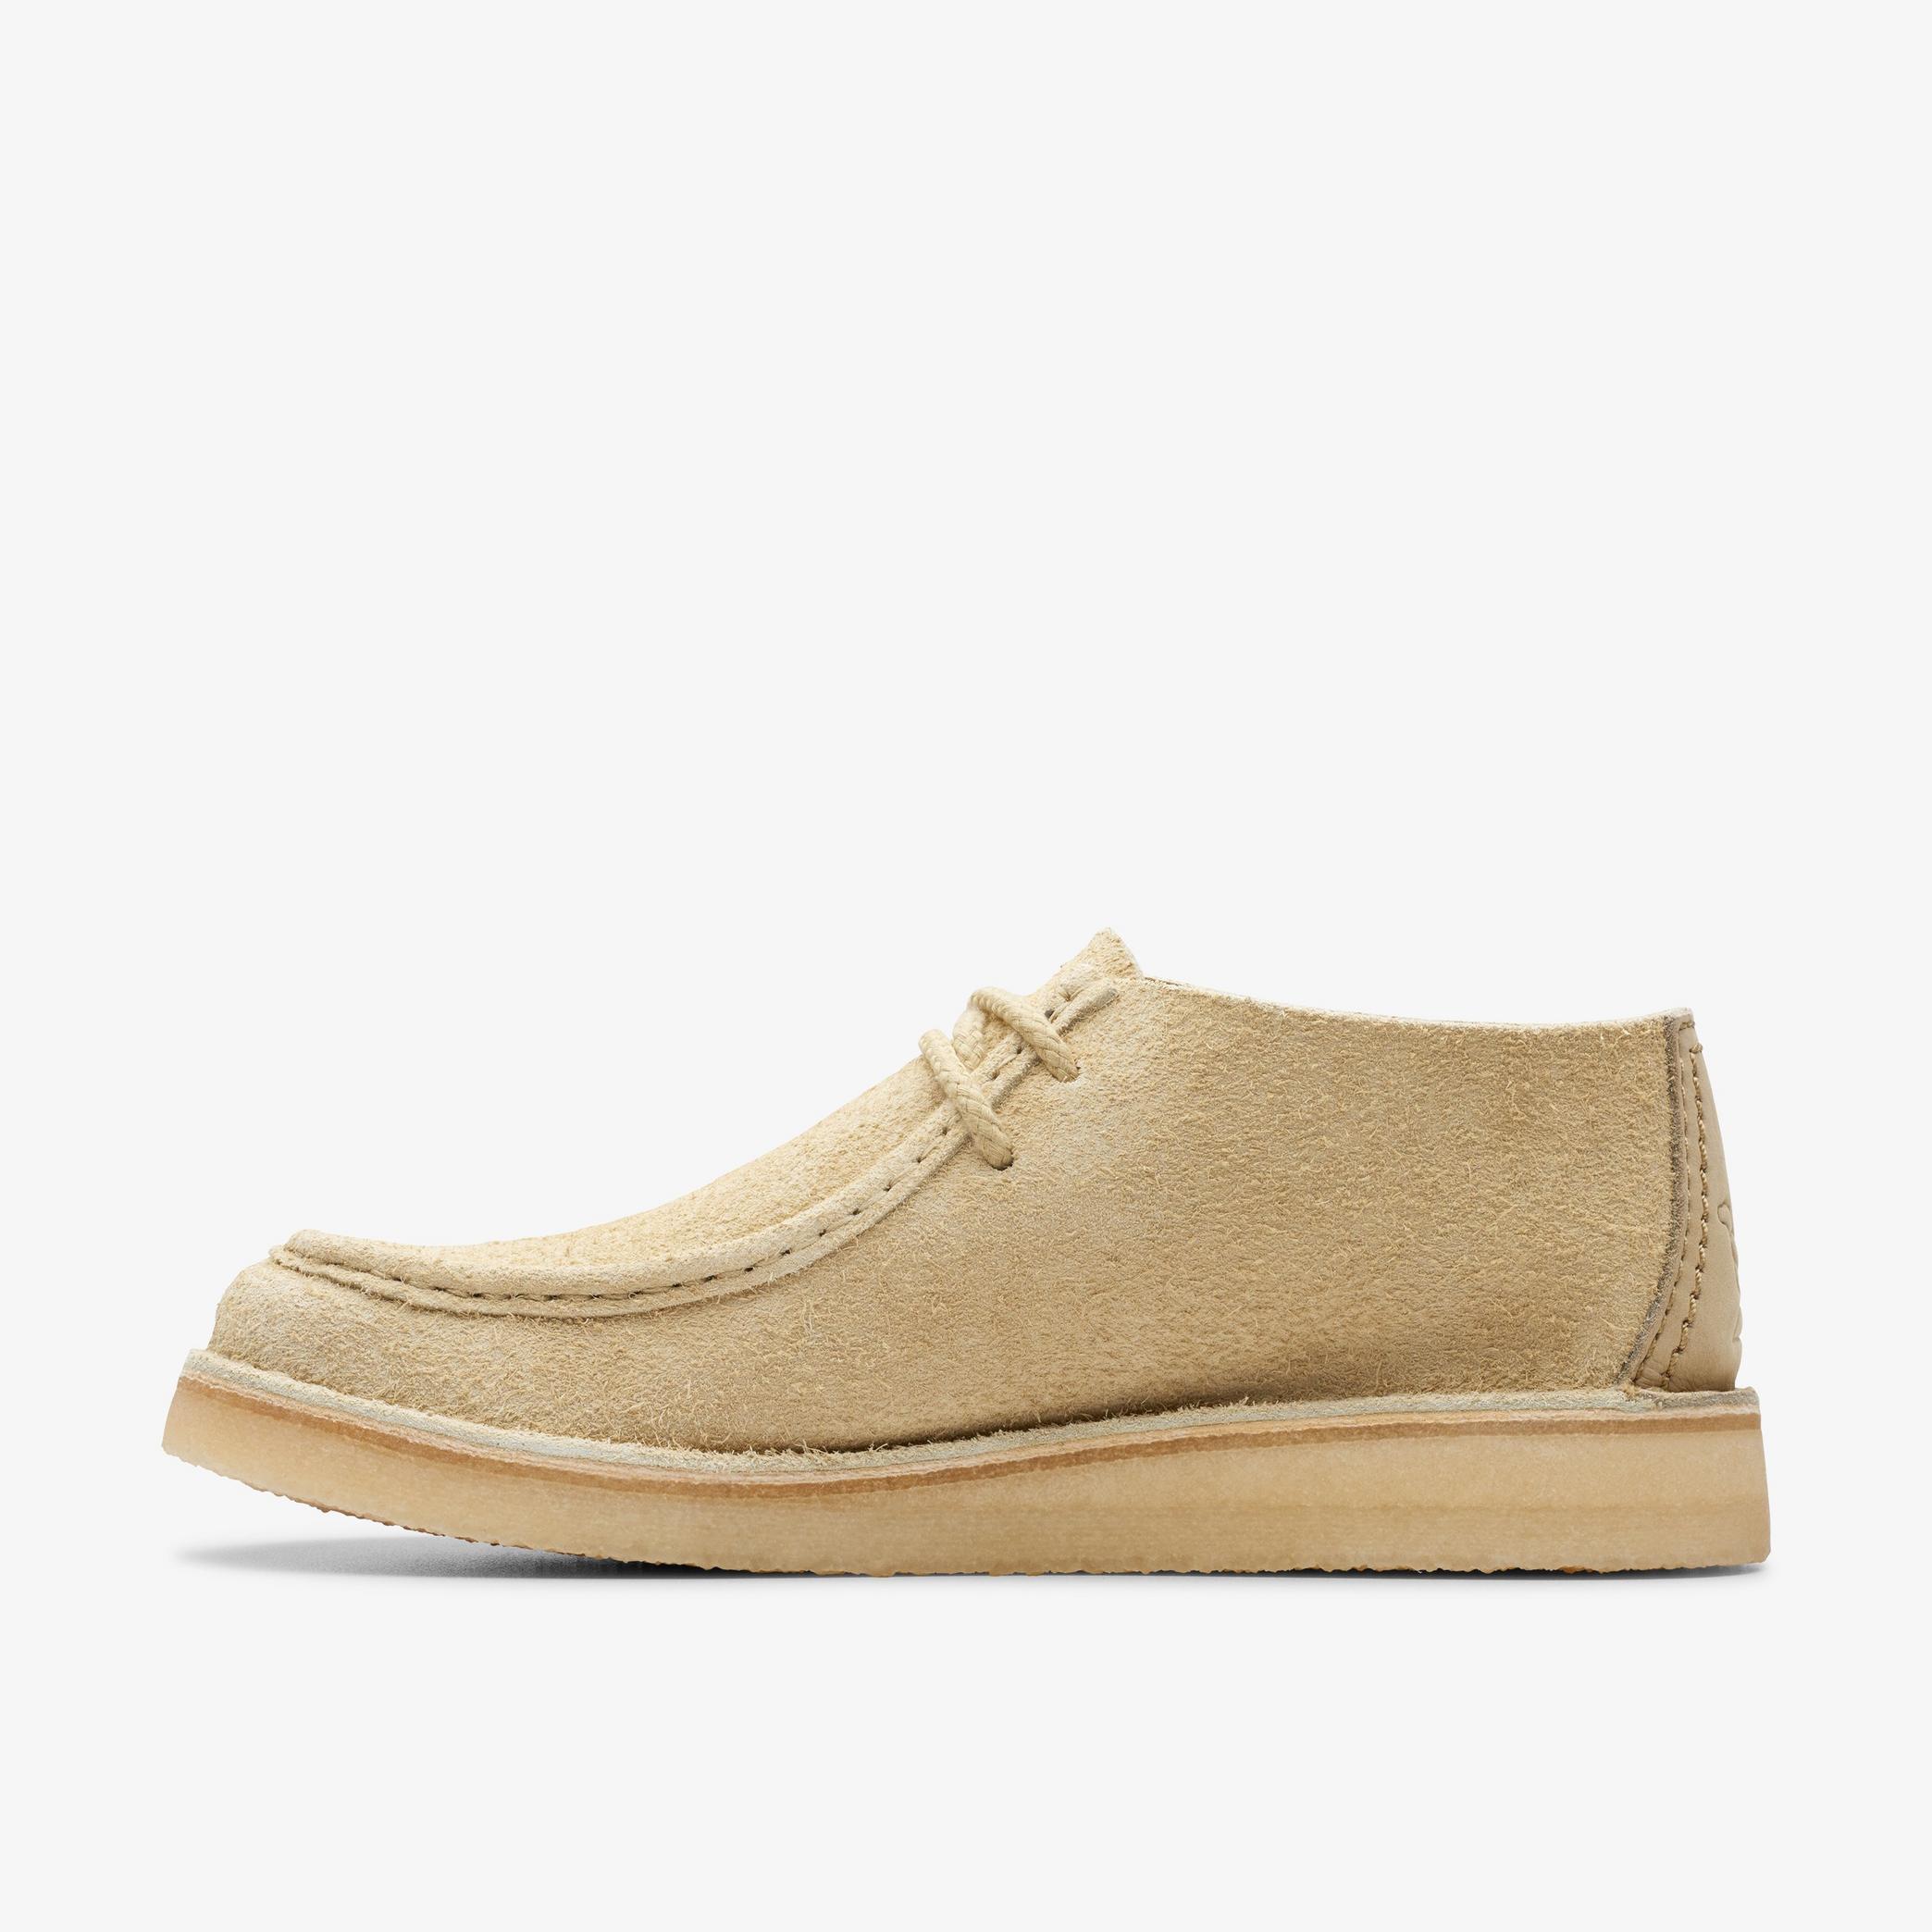 MENS Desert Nomad Maple Hairy Suede Moccasins | Clarks US